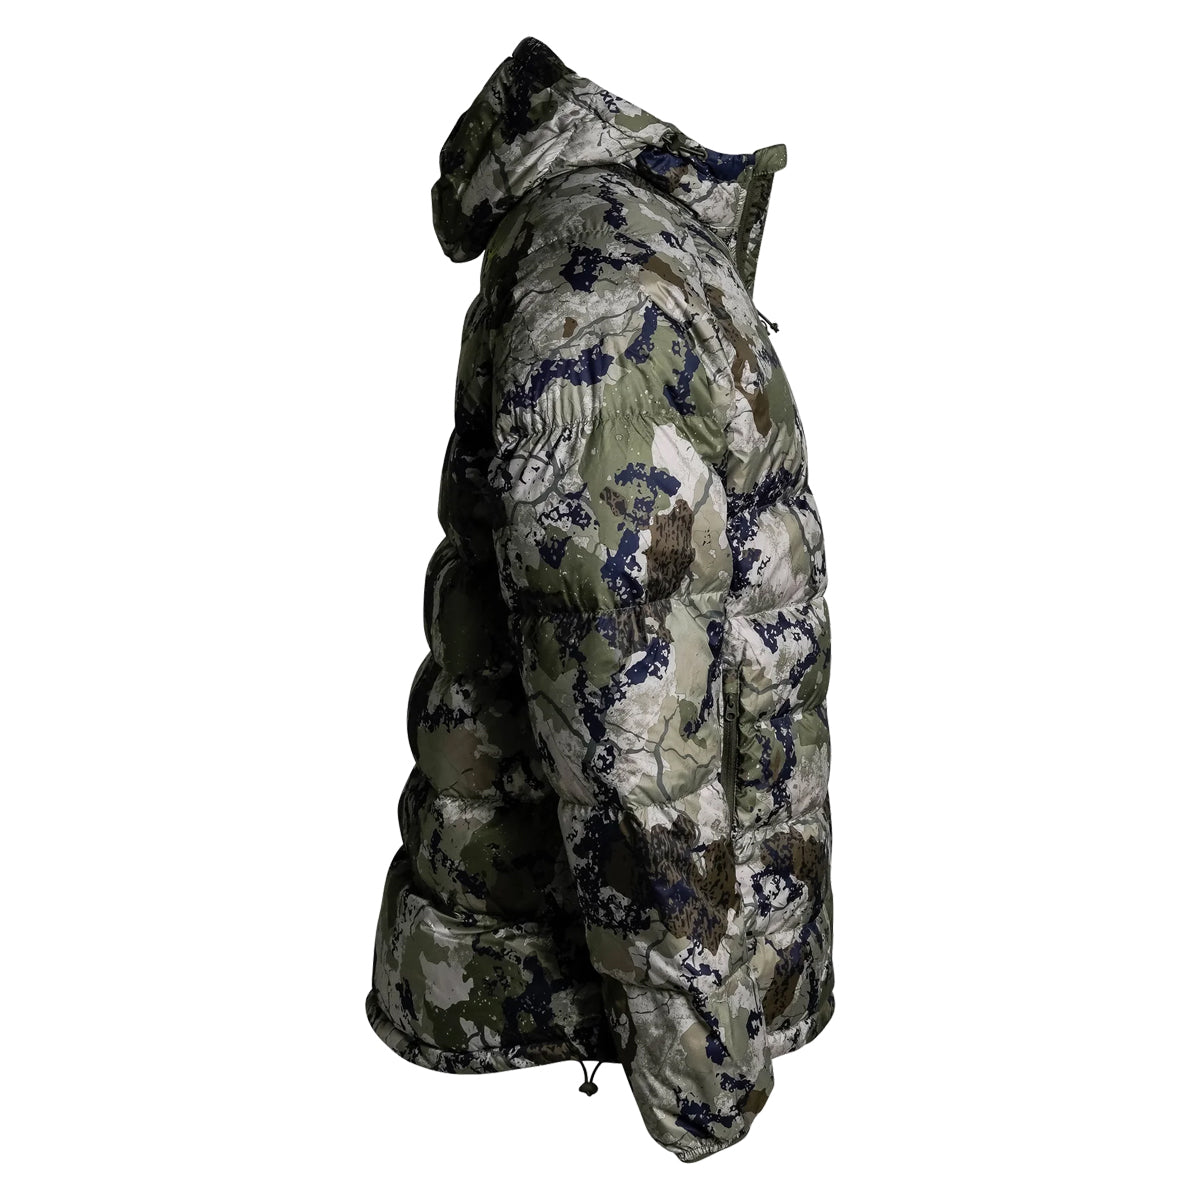 King's XKG Down Transition Jacket in  by GOHUNT | King's - GOHUNT Shop